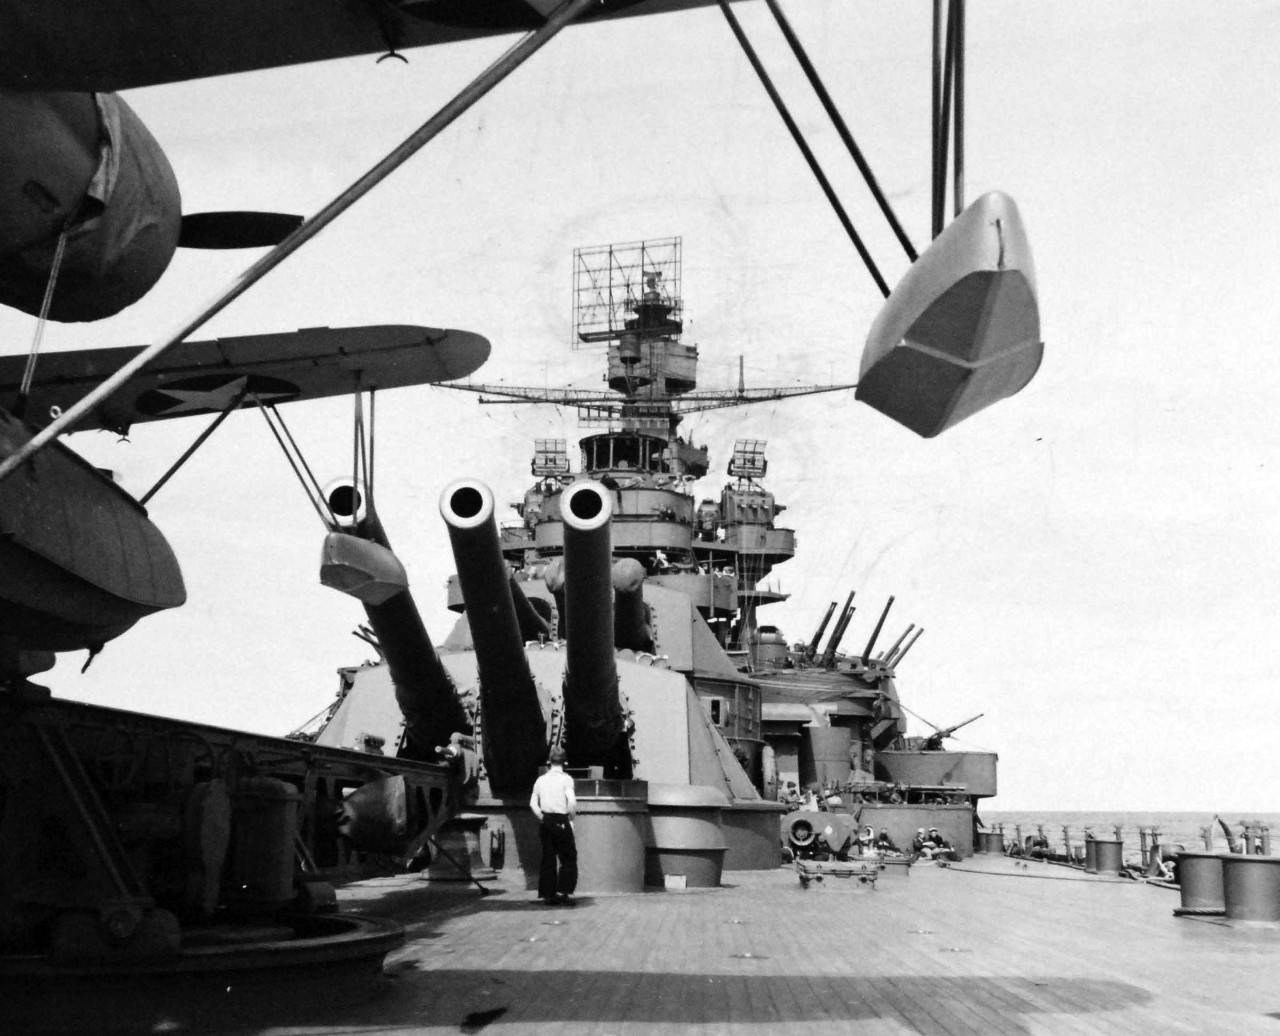 80-G-57050:  Aleutian Island Campaign, June 1942-August 1943.   Battle of Attu, May 11-29, 1943.      USS Pennsylvania (BB 38) 14” guns during bombardment of Attu Island, Alaska, May 11, 1943.    U.S. Navy Photograph, now in the collections of the National Archives.  (2017/05/02).